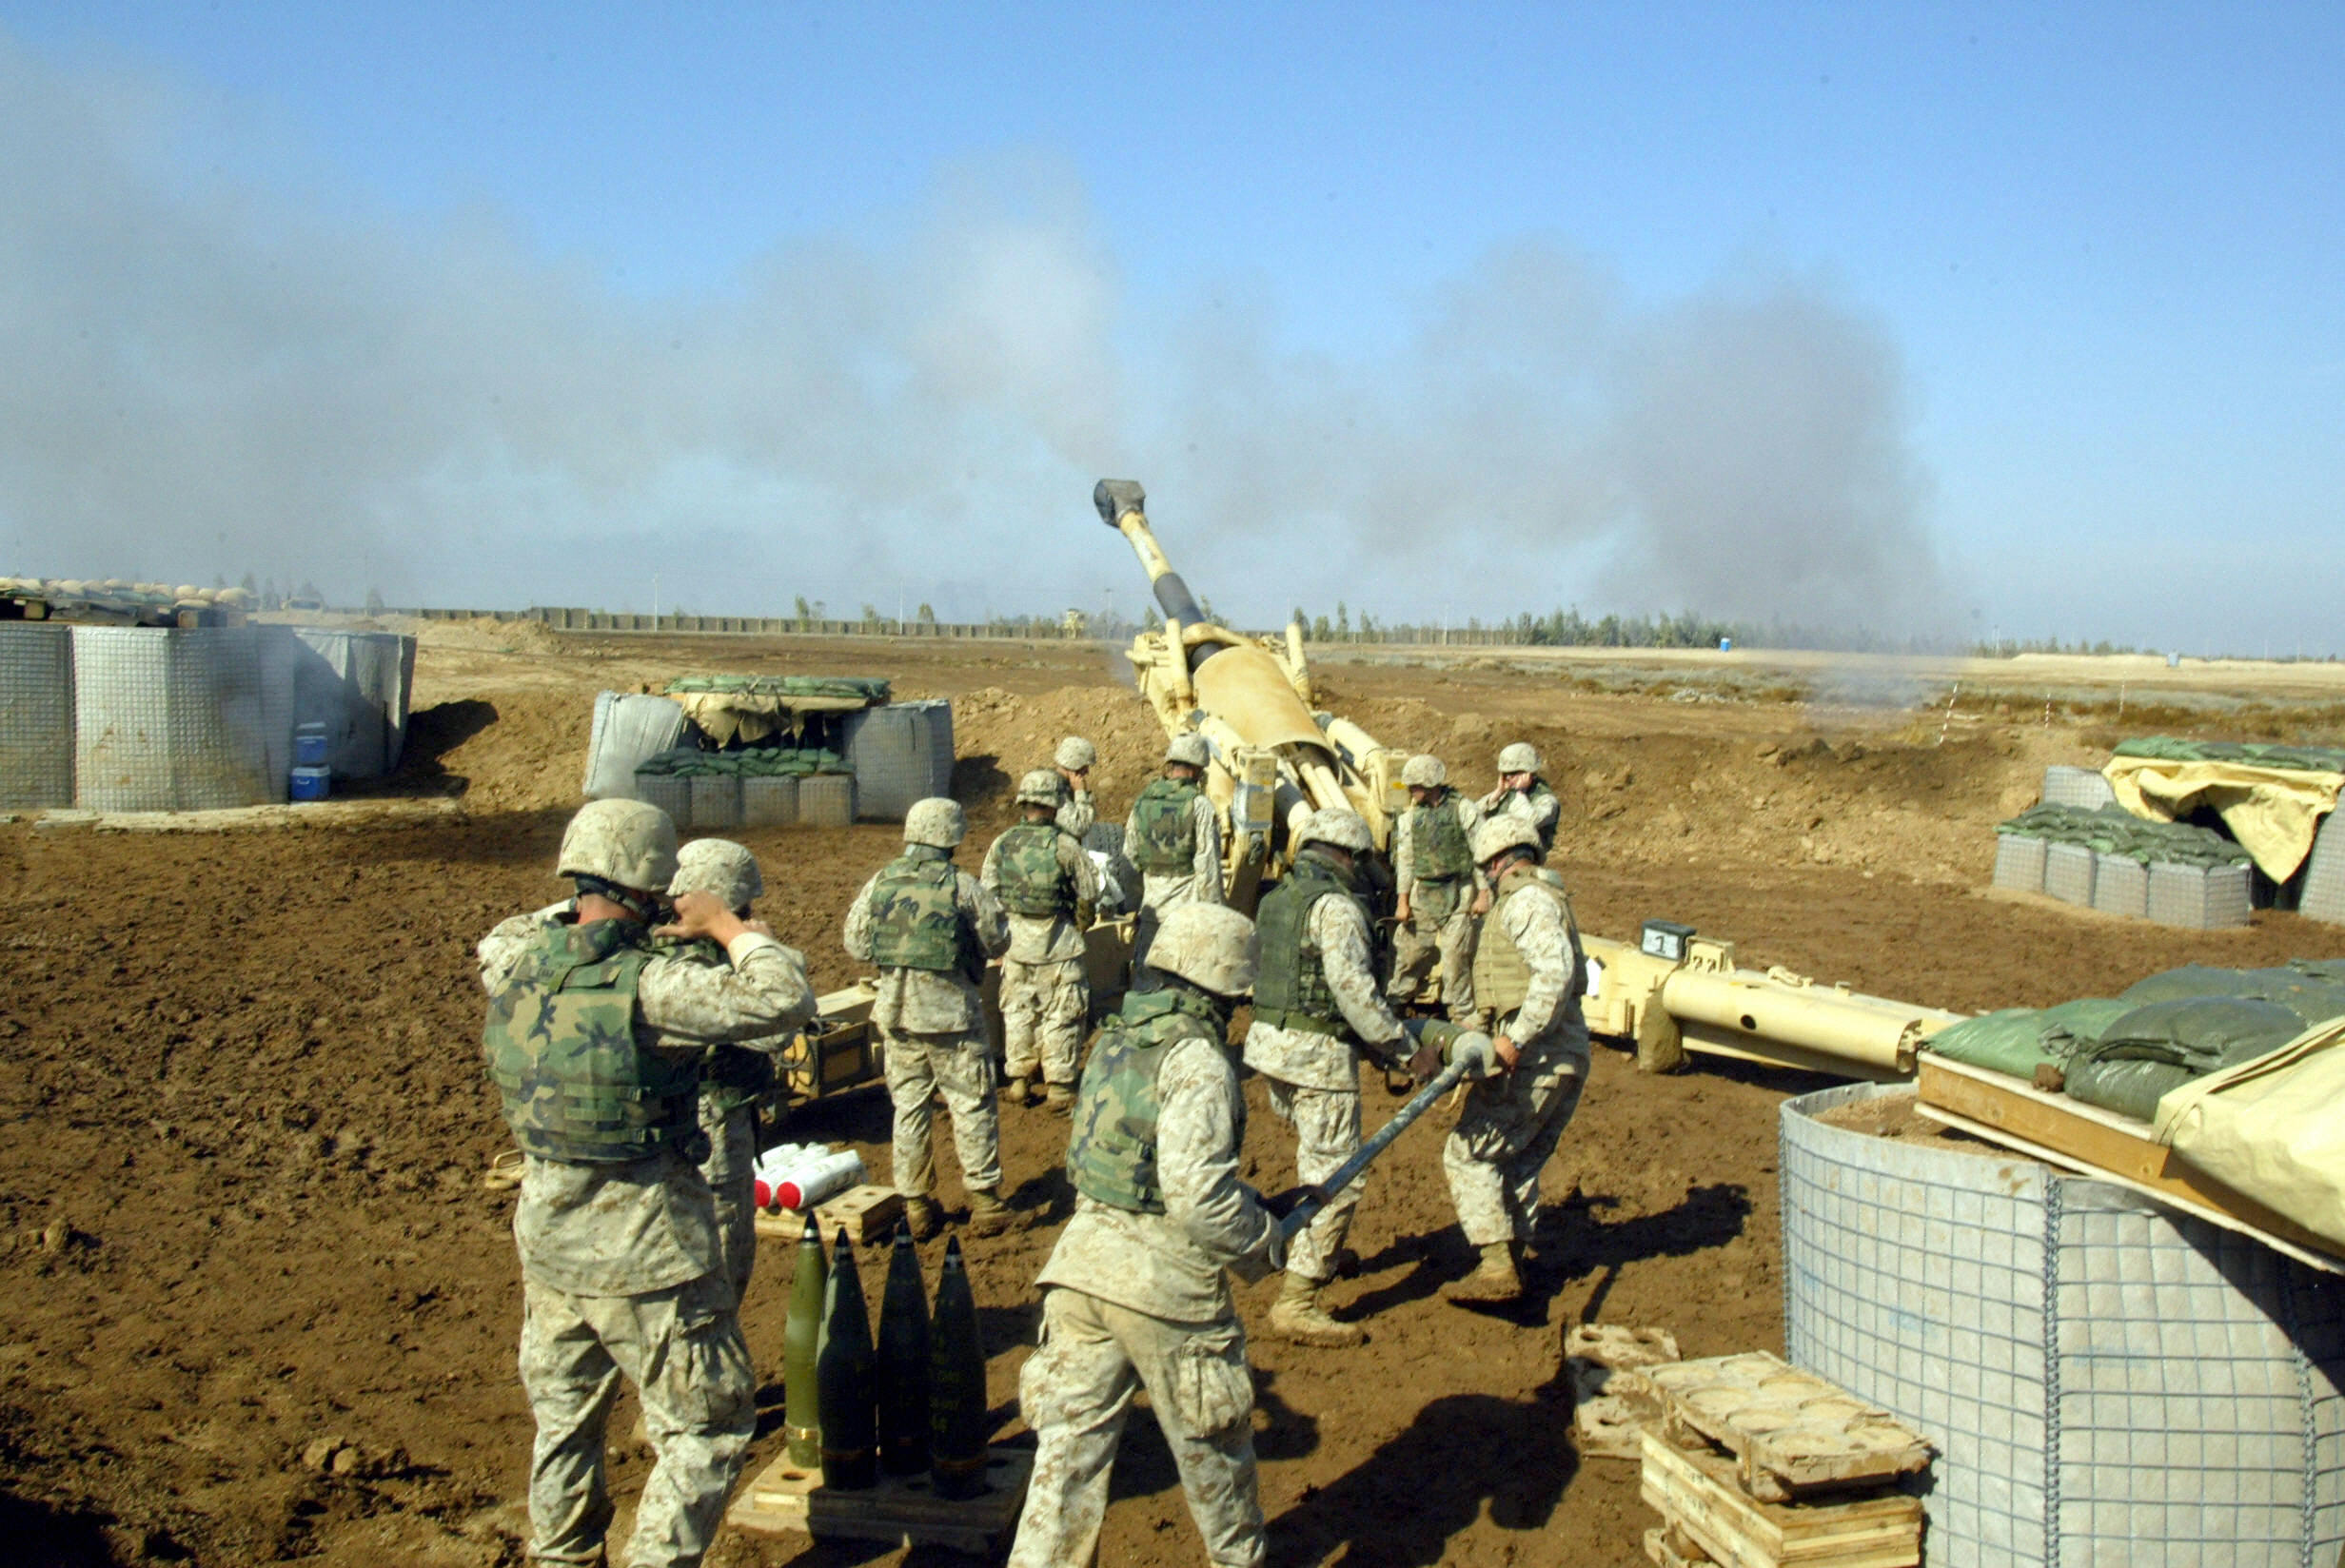 FALLUJAH, IRAQ: US Marines with 4/14 marines Mike Battery fire at insurgents in Fallujah with a 155mm Howitzer canon 09 November 2004, 50 kms west of Baghdad. US troops with crack Iraqi soldiers surged into the heart of Fallujah today in a hail of explosions and gunfire on the second day of the largest operation in Iraq since last year's US-led war. 